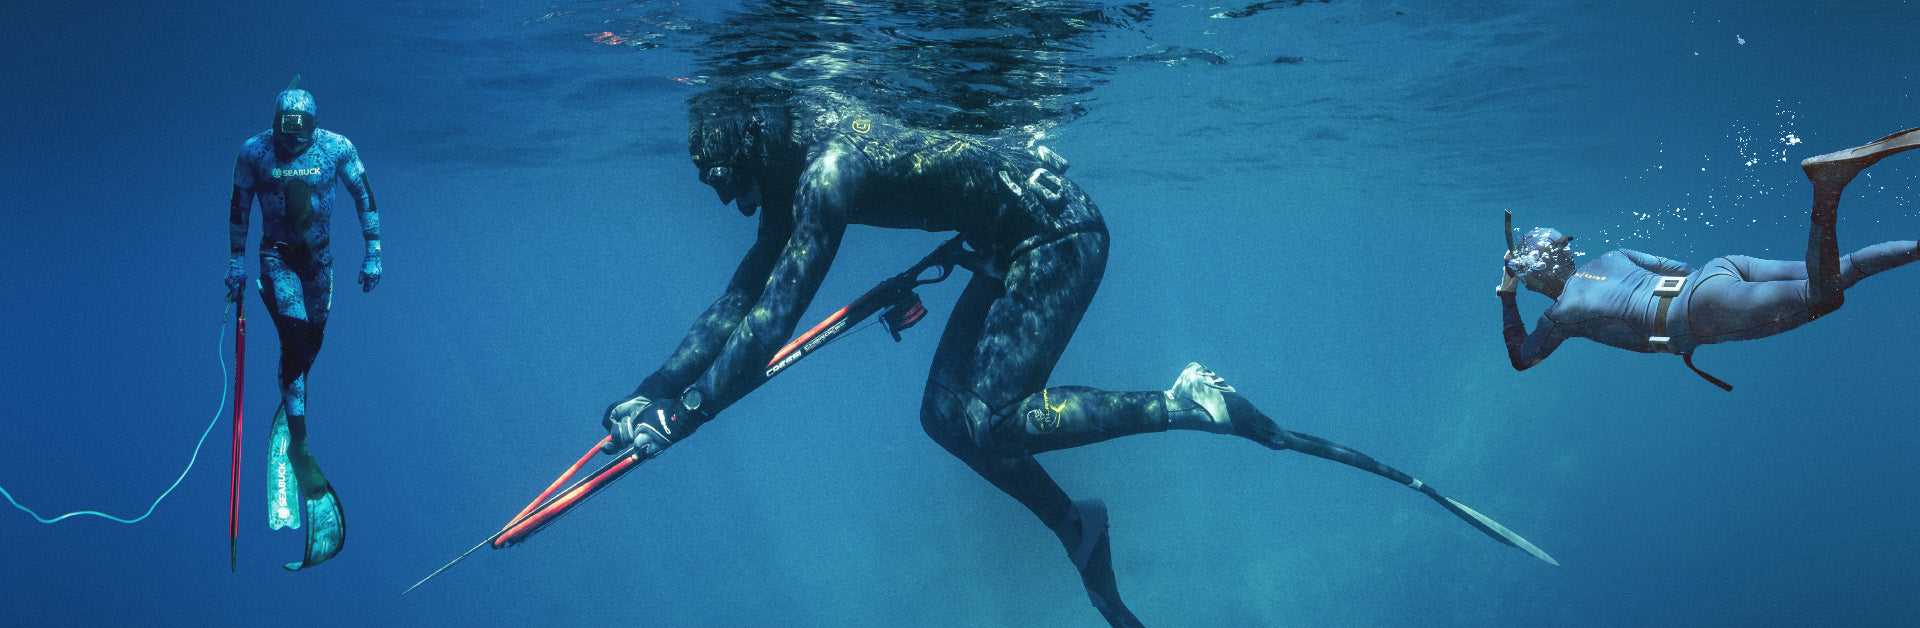 Buy Rob Allen Spearfishing Freedive Kit online at